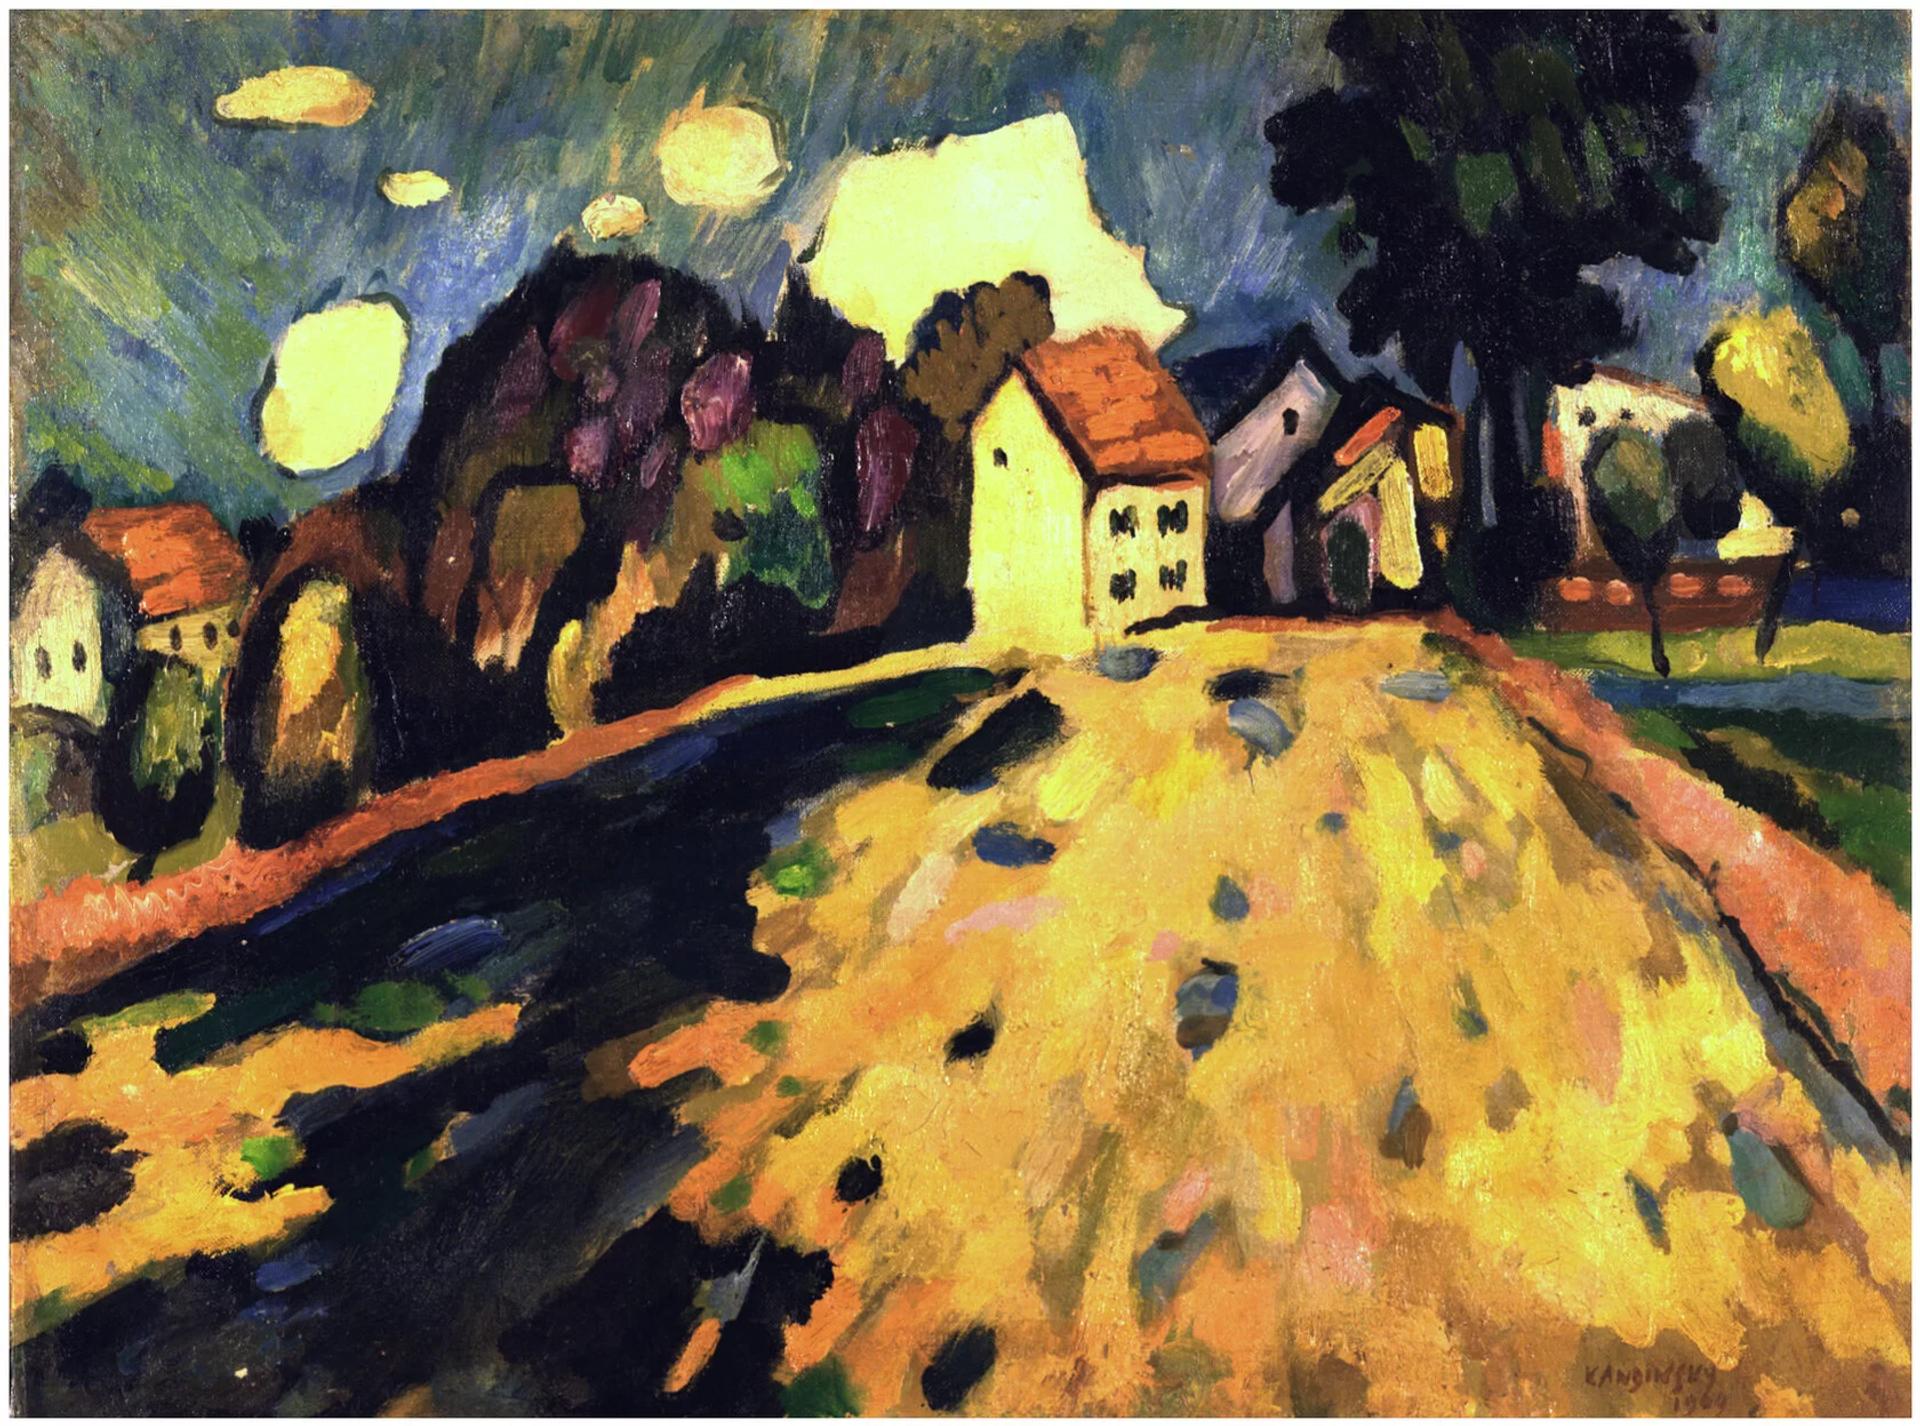 Murnau. House on the Hill, a painting allegedly by Kandinsky, is offered on a website raising funds to support Russia's war in Ukraine. Courtesy of Terricone Project